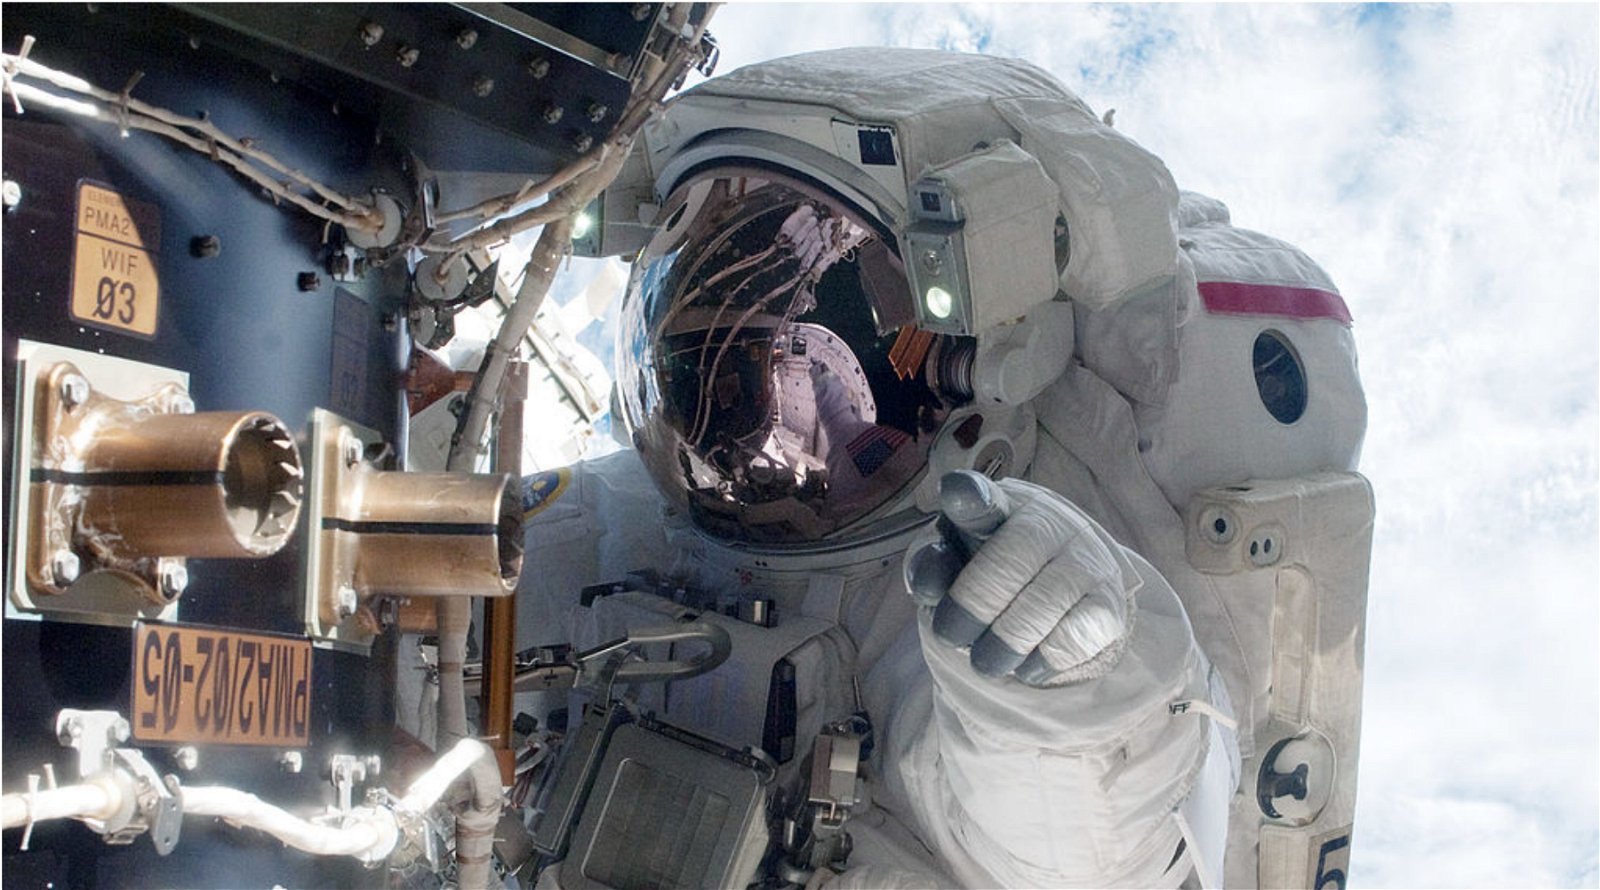 Long hibernation of astronauts on distant voyages: the first human experiments in 10 years?